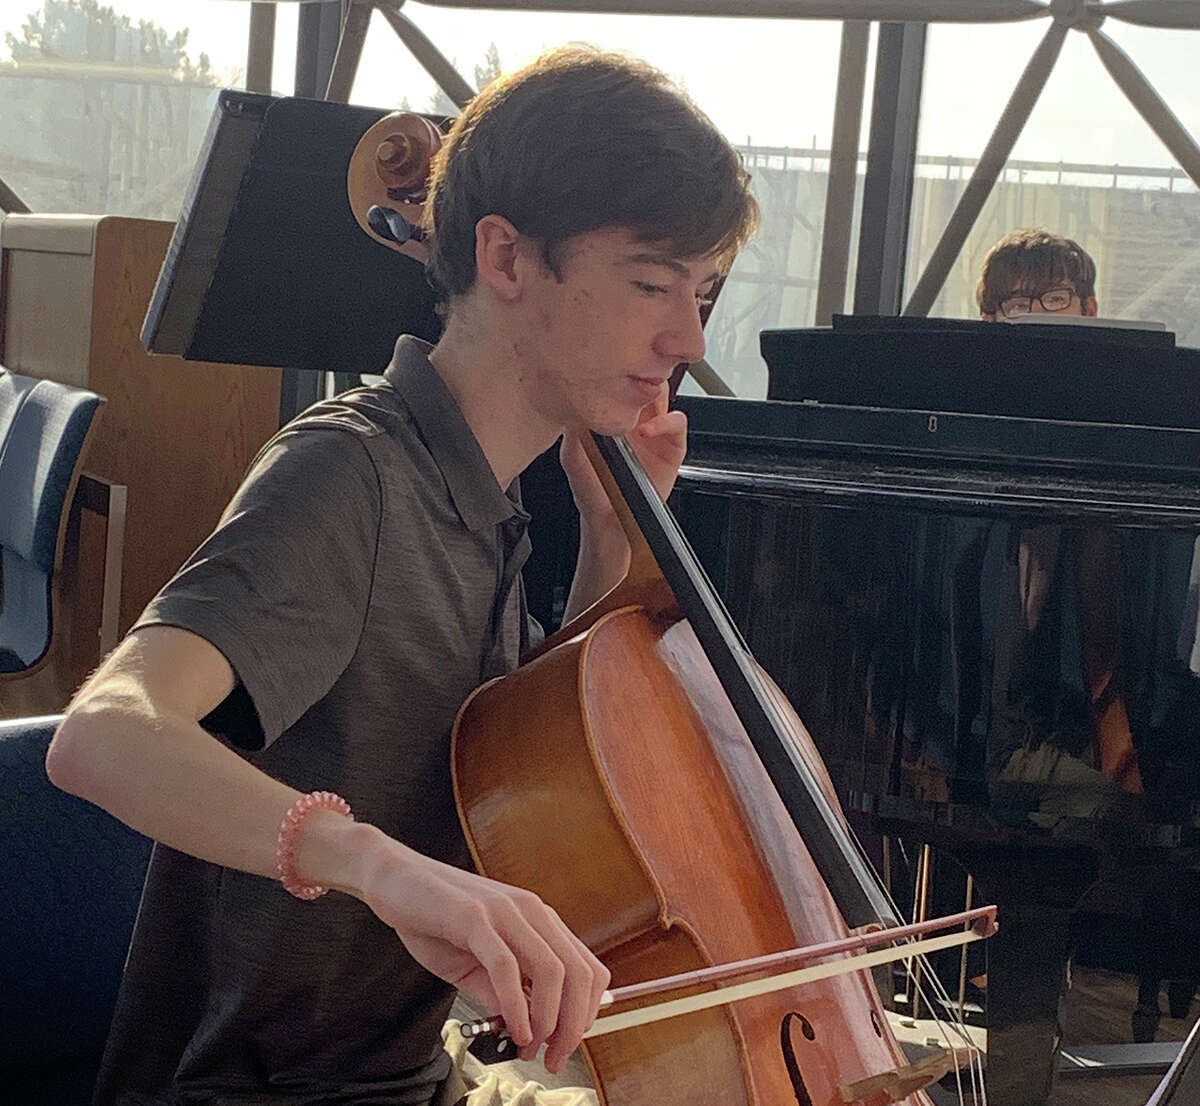 A cellist with Metro-East Lutheran High School performs during a choir and strings ensemble Tuesday at the Lutheran Church Missouri Synod's International Center in St. Louis.